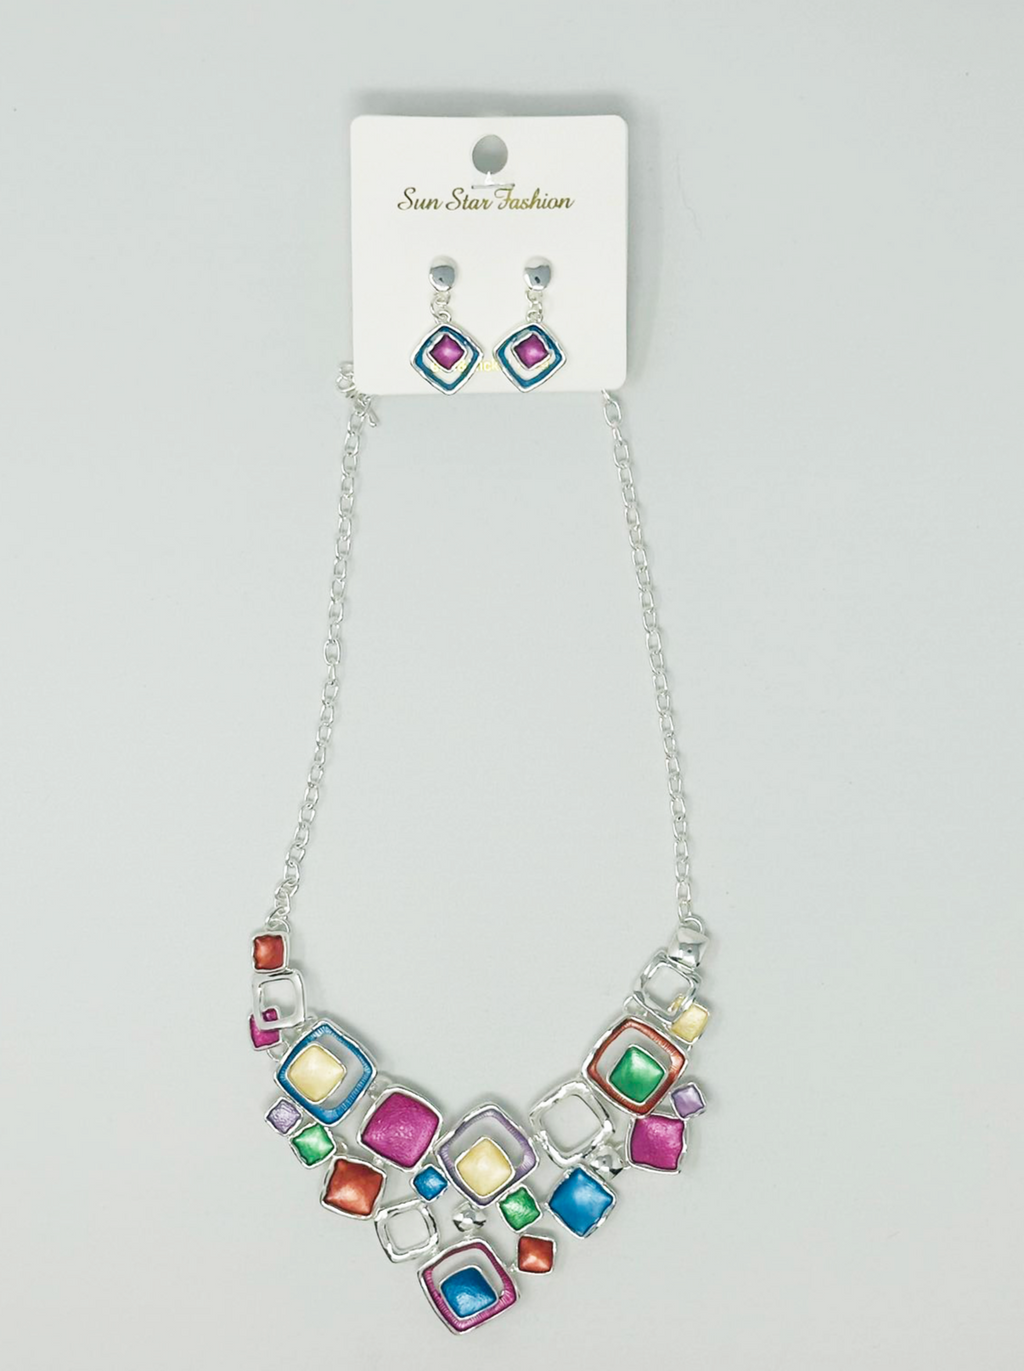 Earring and necklace set